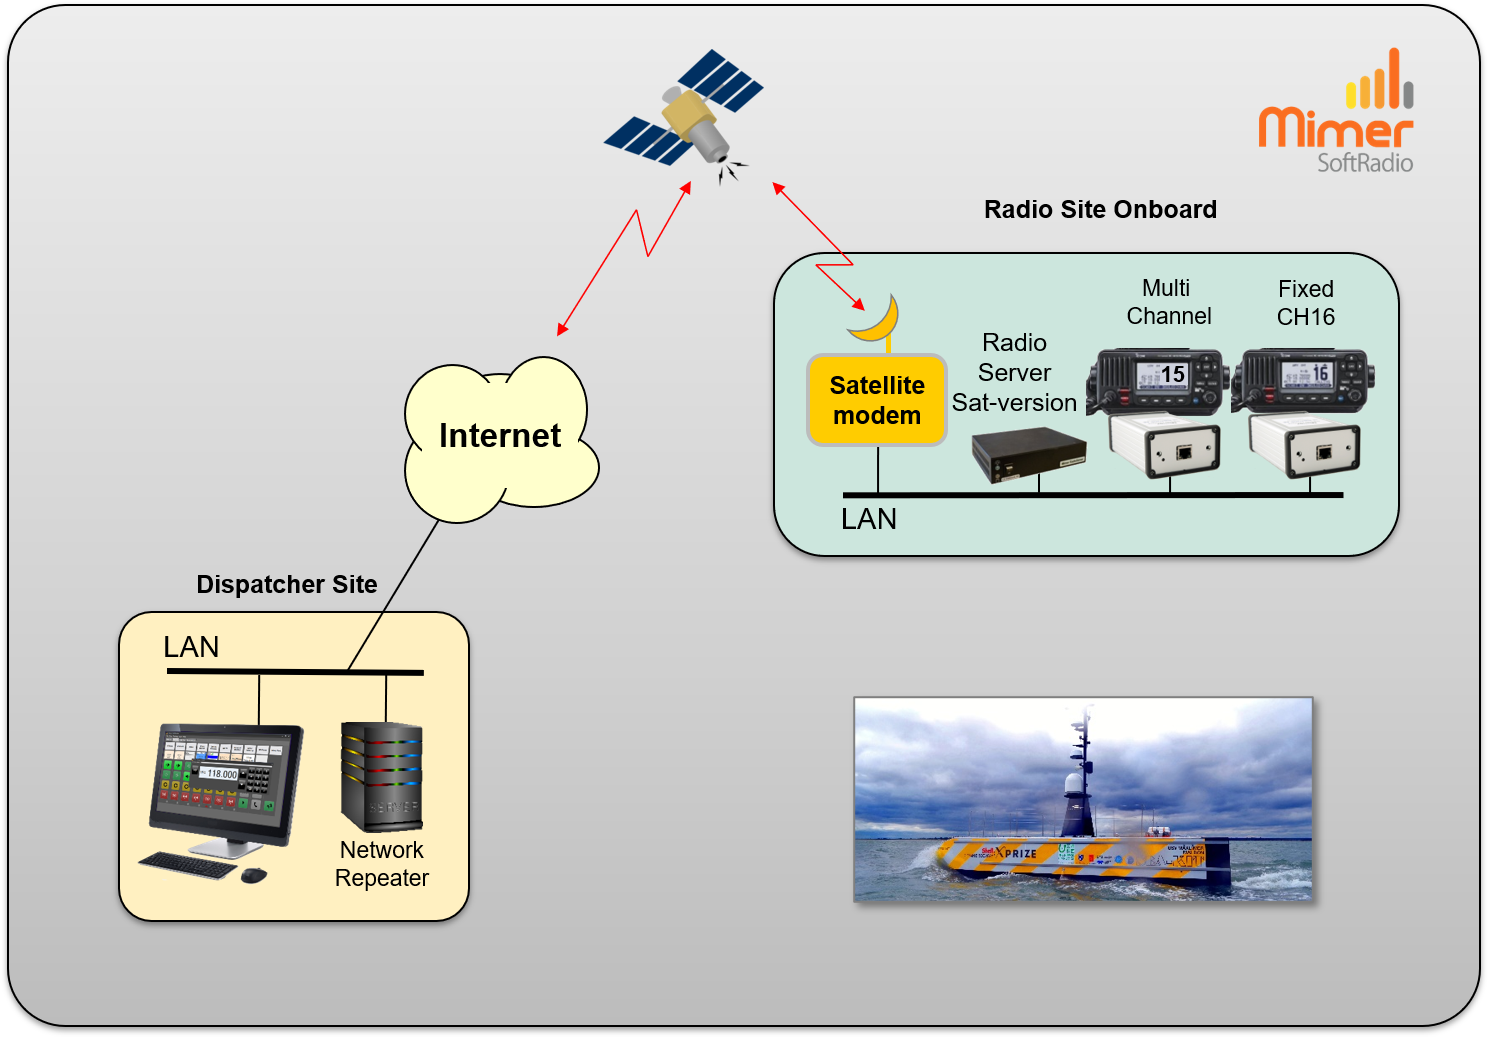 SoftRadio onboard unmanned vessel, connected over satellite.